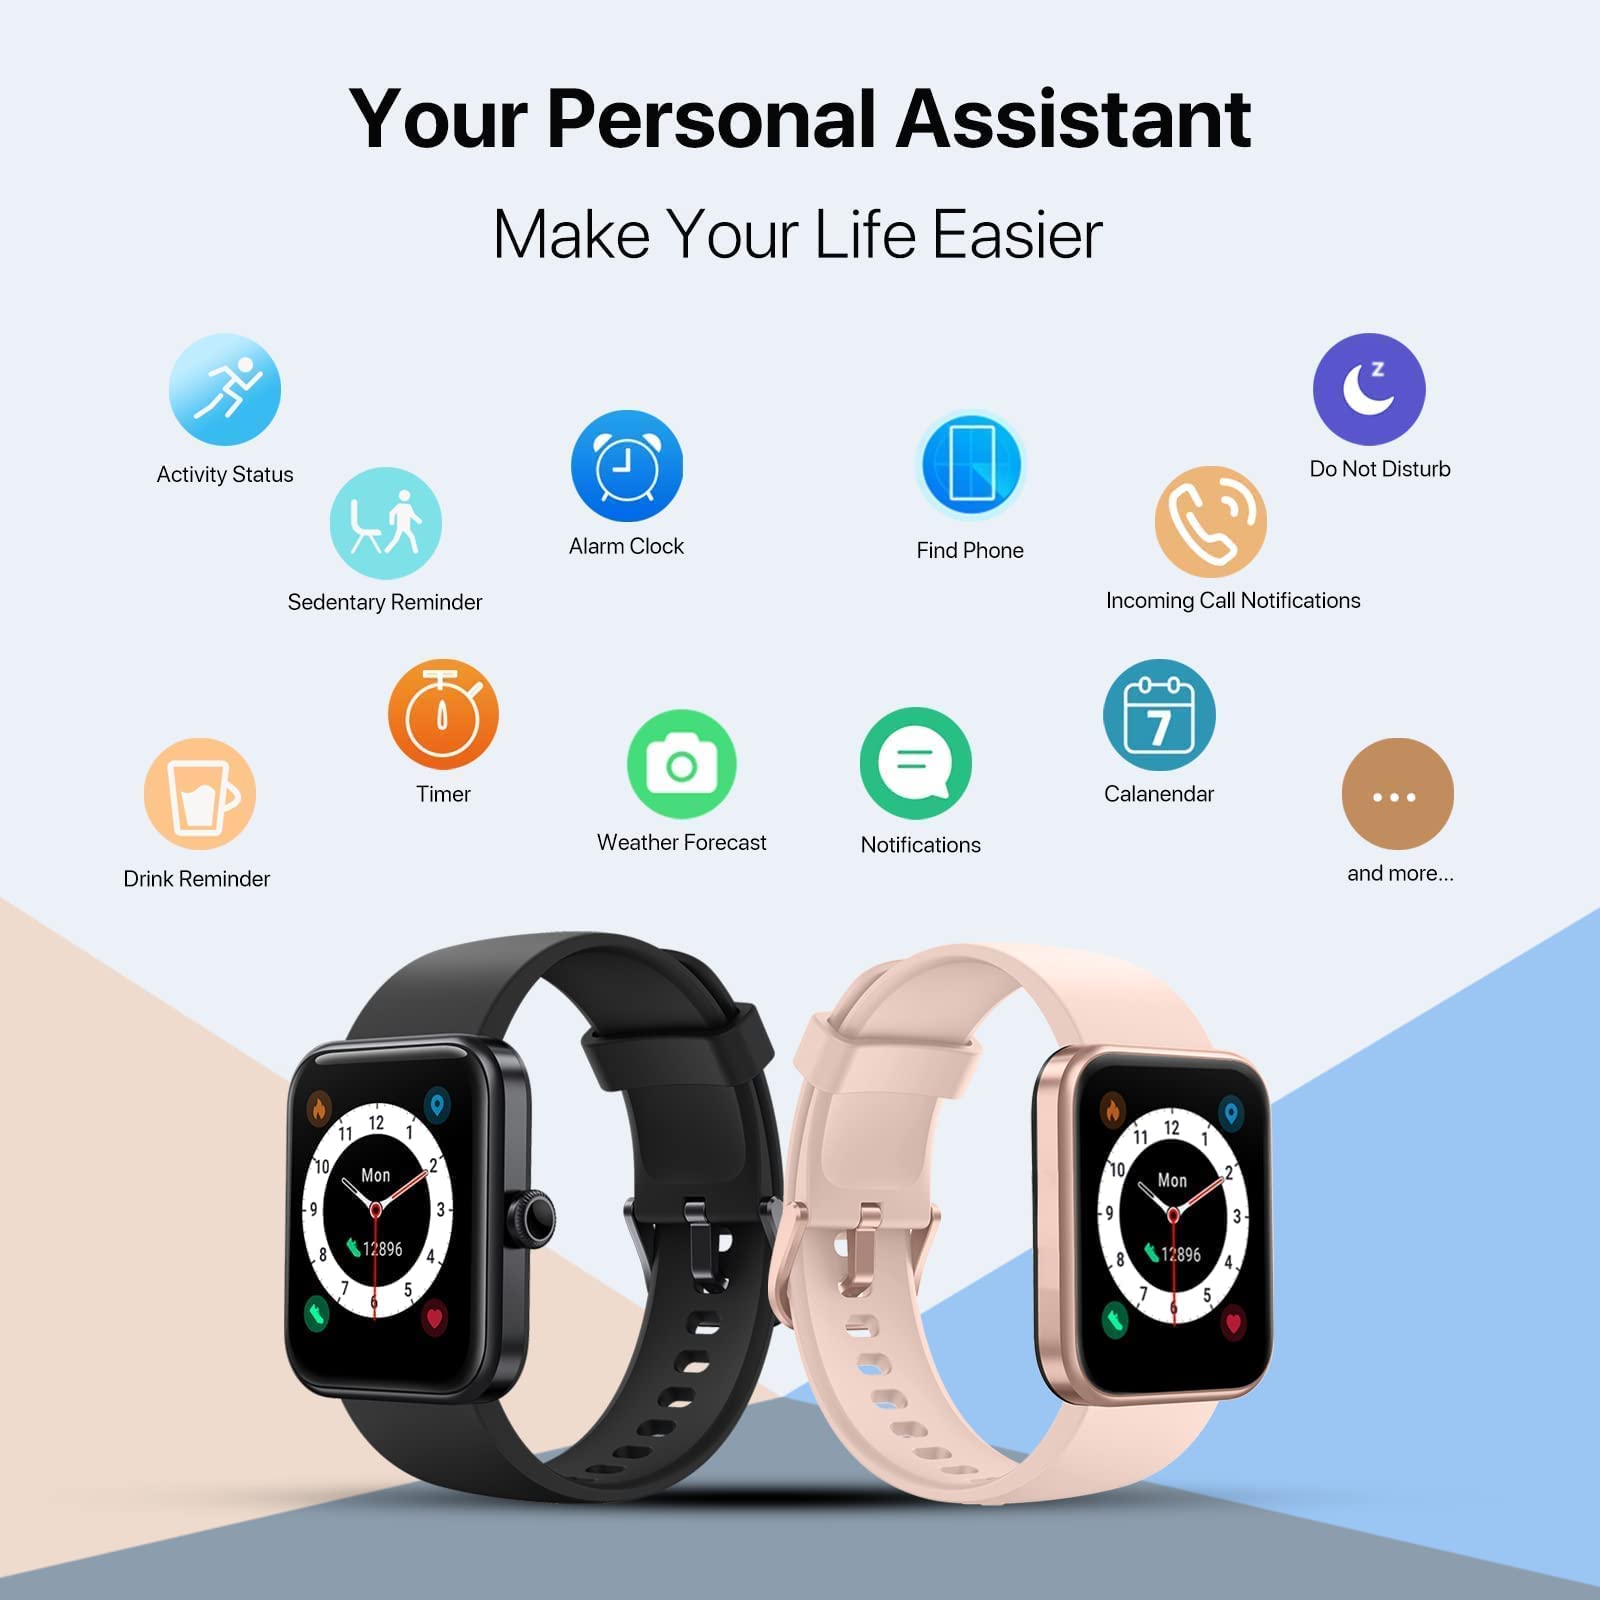 UMIDIGI UFit Pro His and Her Smart Watch Alexa Built-in,Fitness Tracker with Heart Rate , SpO2 and Sleep Monitor, 5ATM Waterproof HD Color Touchscreen Smart Watch for Couples